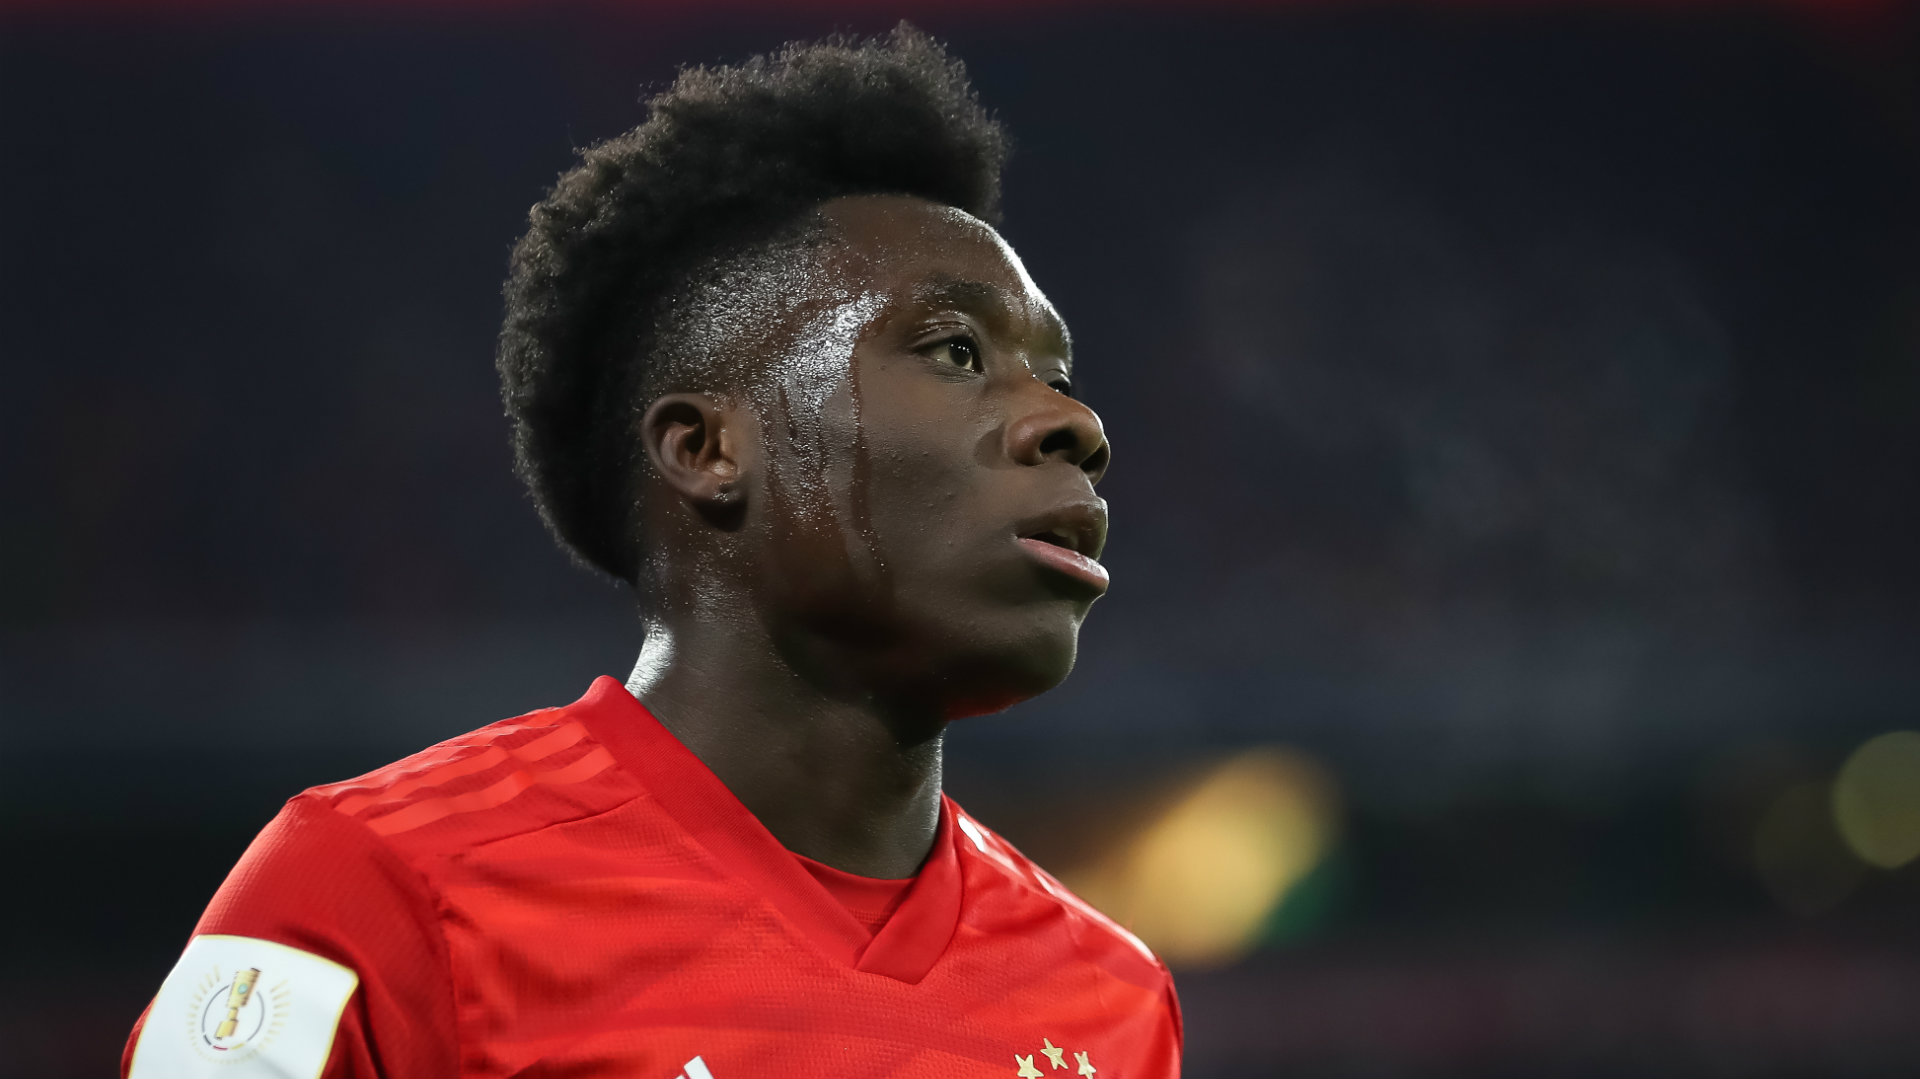 Davies planning to spend ‘as long as possible’ in Germany after bursting onto the scene at Bayern Munich